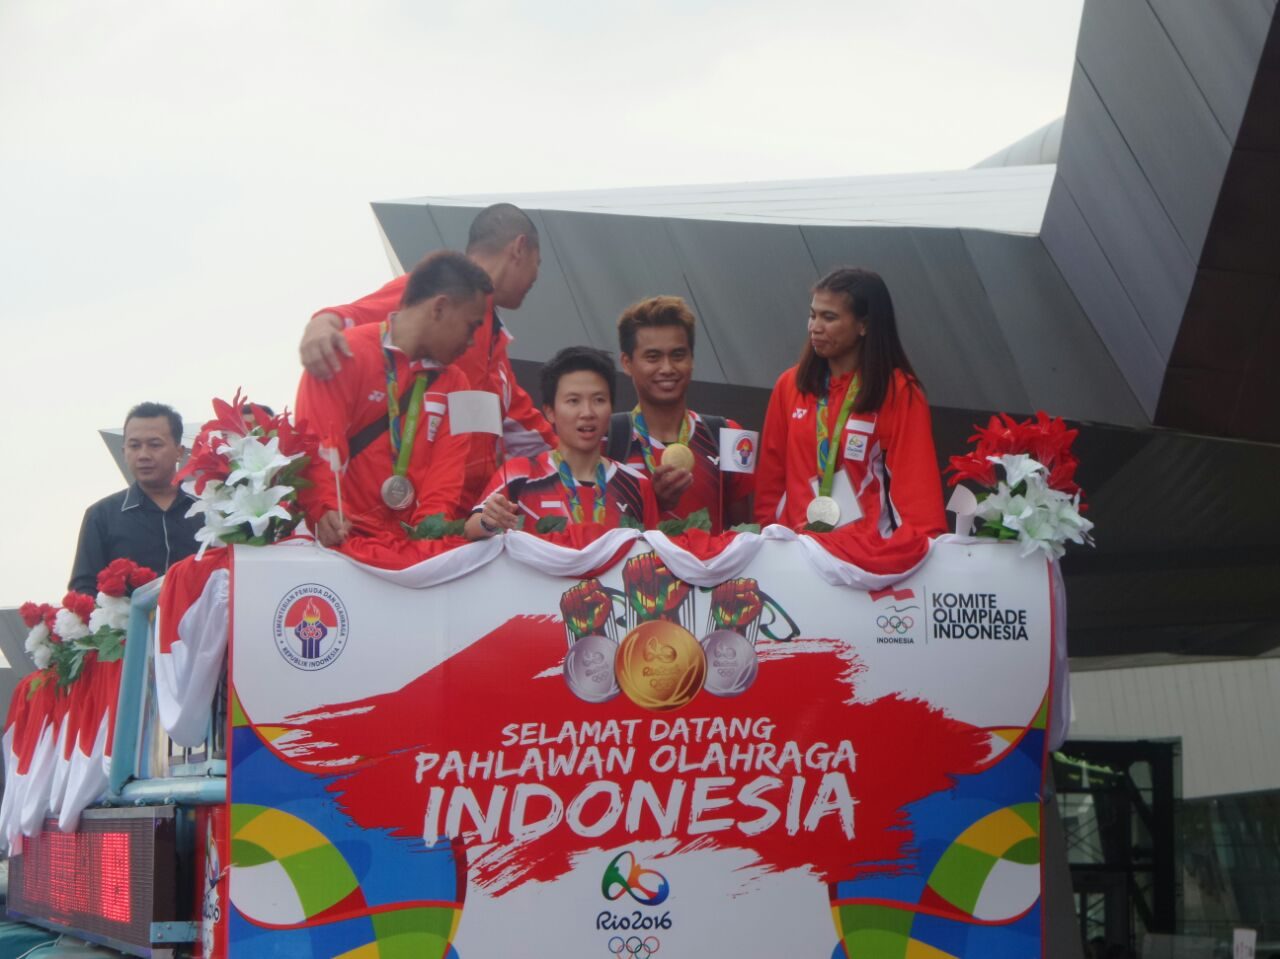 Hero’s welcome for Indonesian Olympic gold medalists